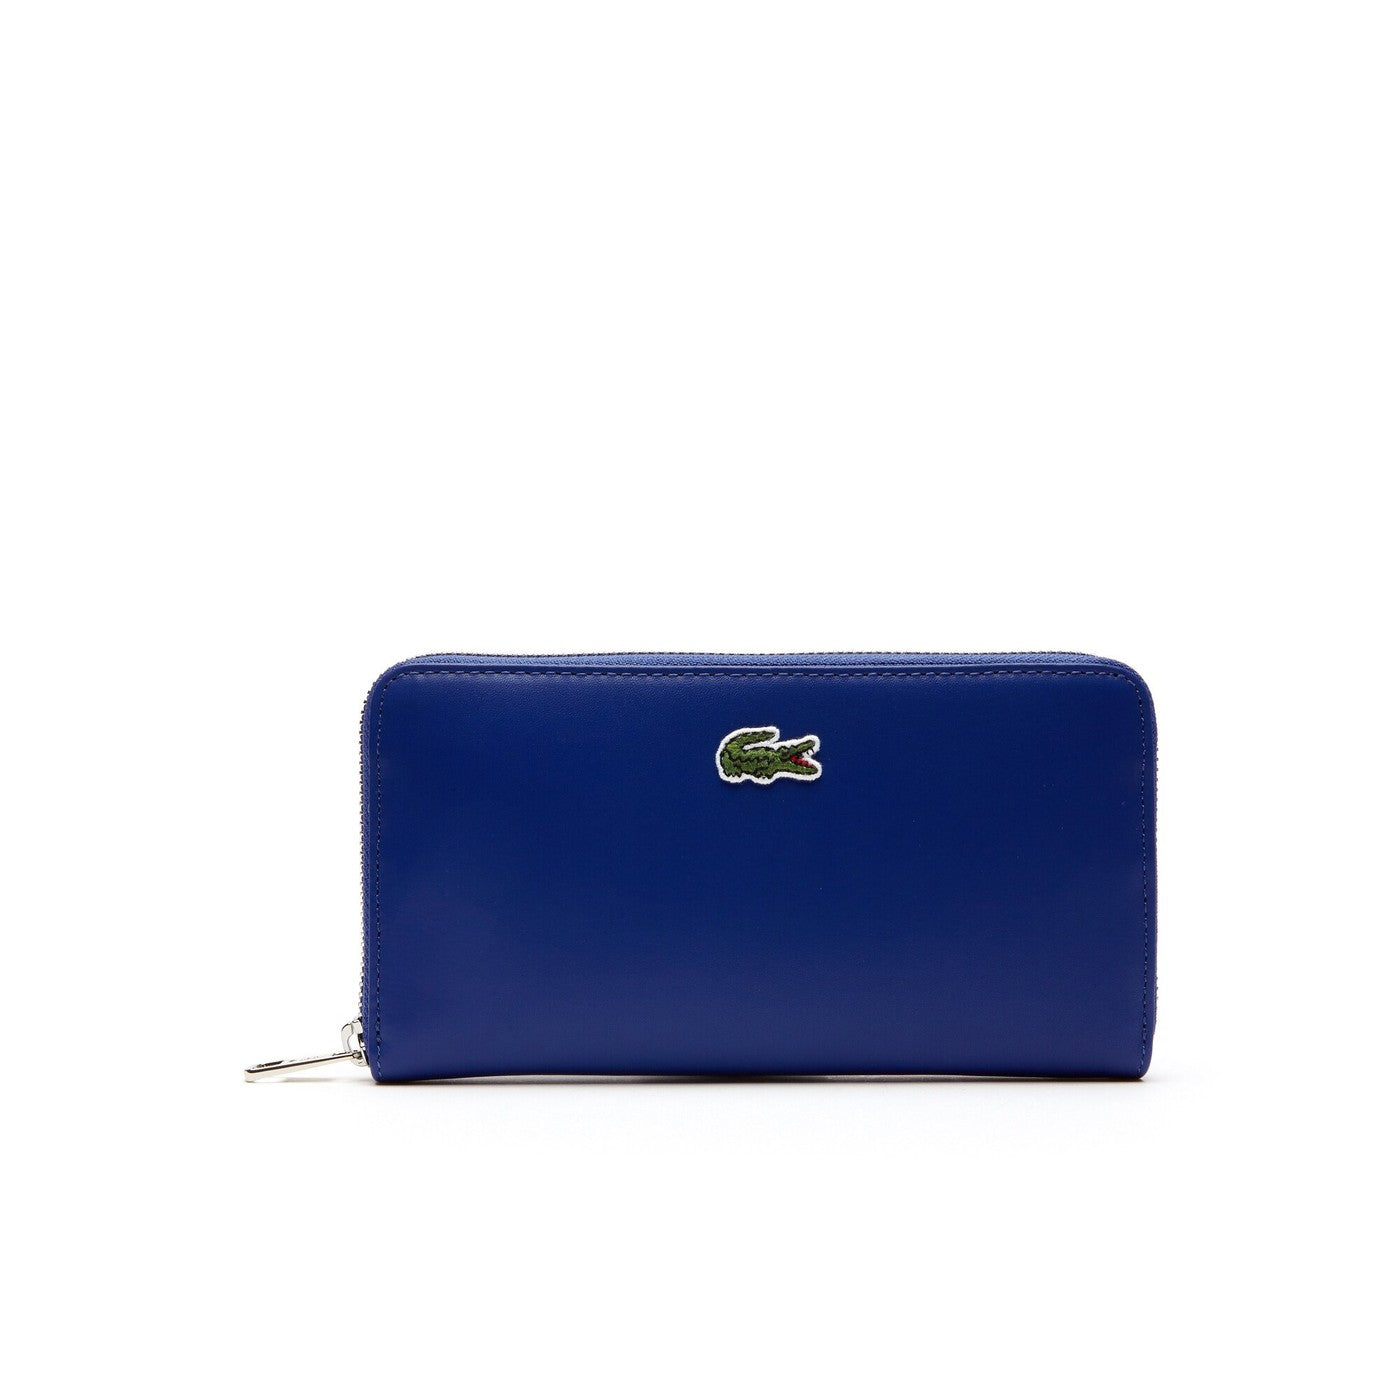 Shop The Latest Collection Of Lacoste L Zip Wallet-Nf2696Xm In Lebanon